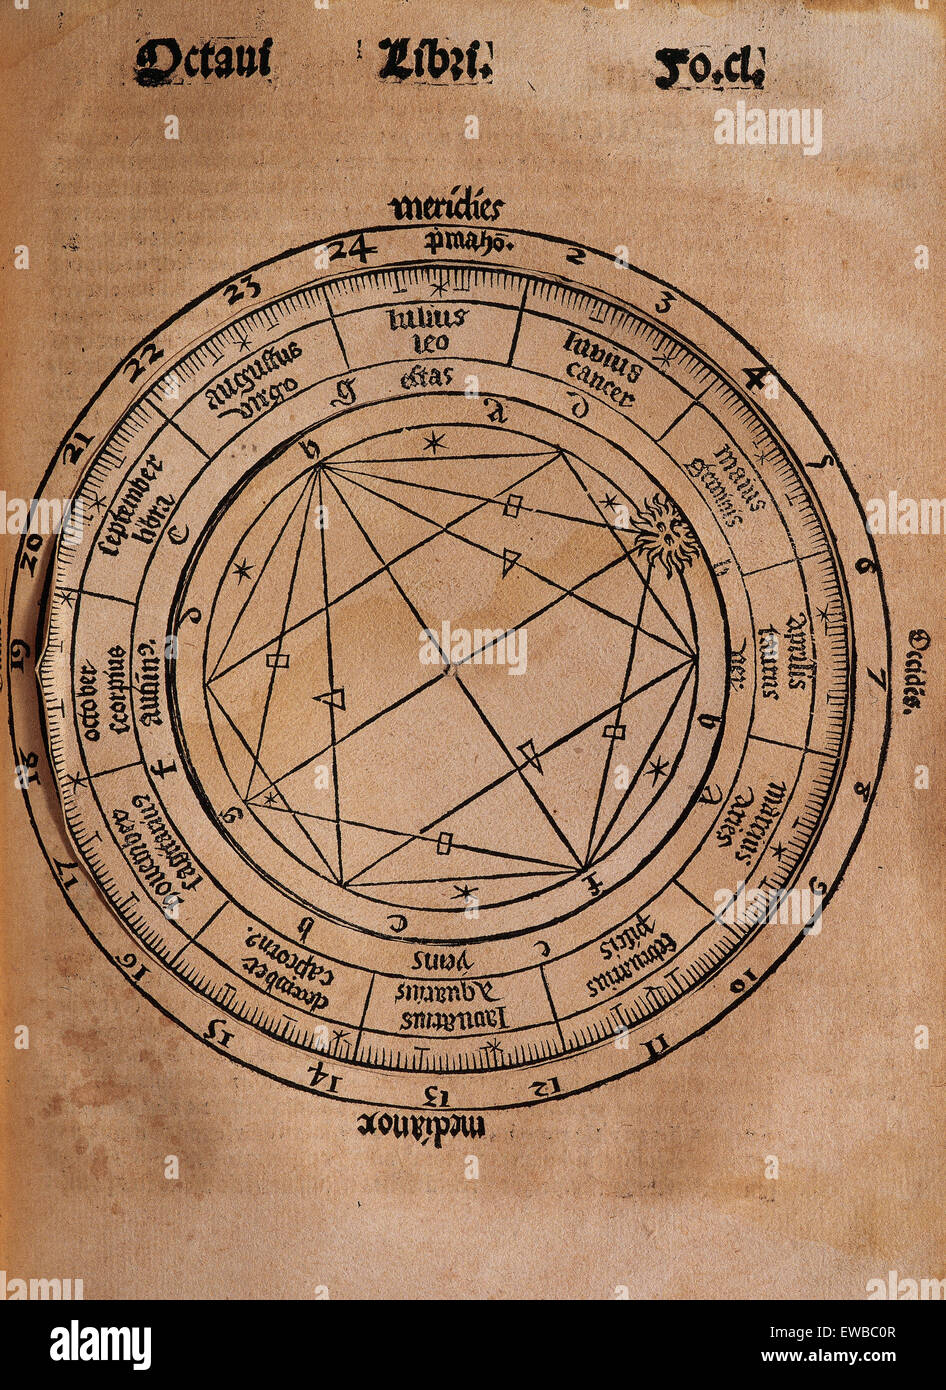 Ramon Llull (1235-1316). Spanish writer and philosopher. Practica Compendiosa Artis Raymundi Lulli, 1523. Book eighth. Astrology subject. Engraving depicting a circular figure describing the hours of the day, the zodiacal signs and their respective months and four seasons. Stock Photo